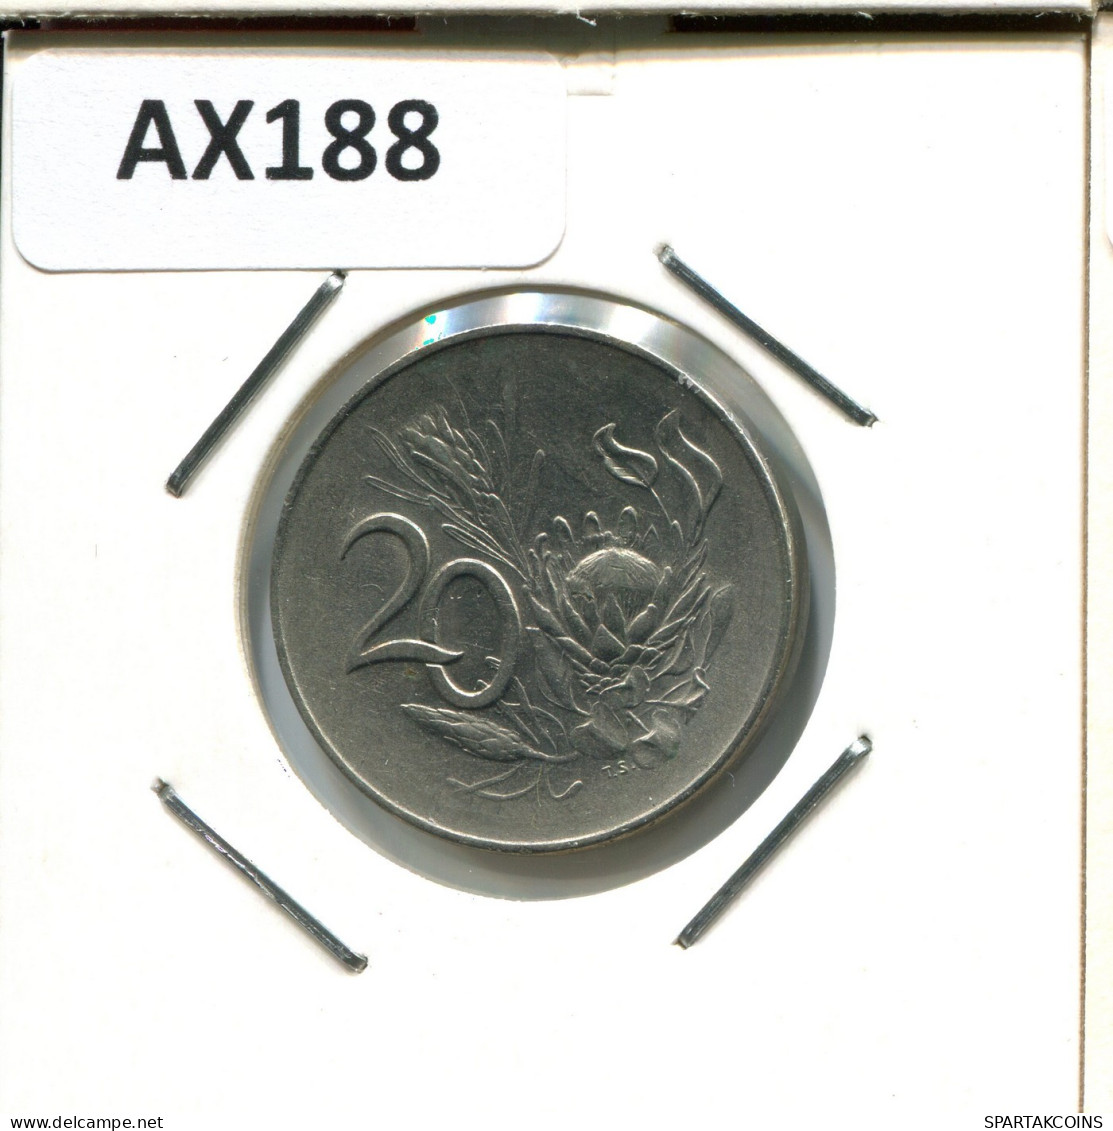 20 CENTS 1965 SOUTH AFRICA Coin #AX188.U.A - South Africa